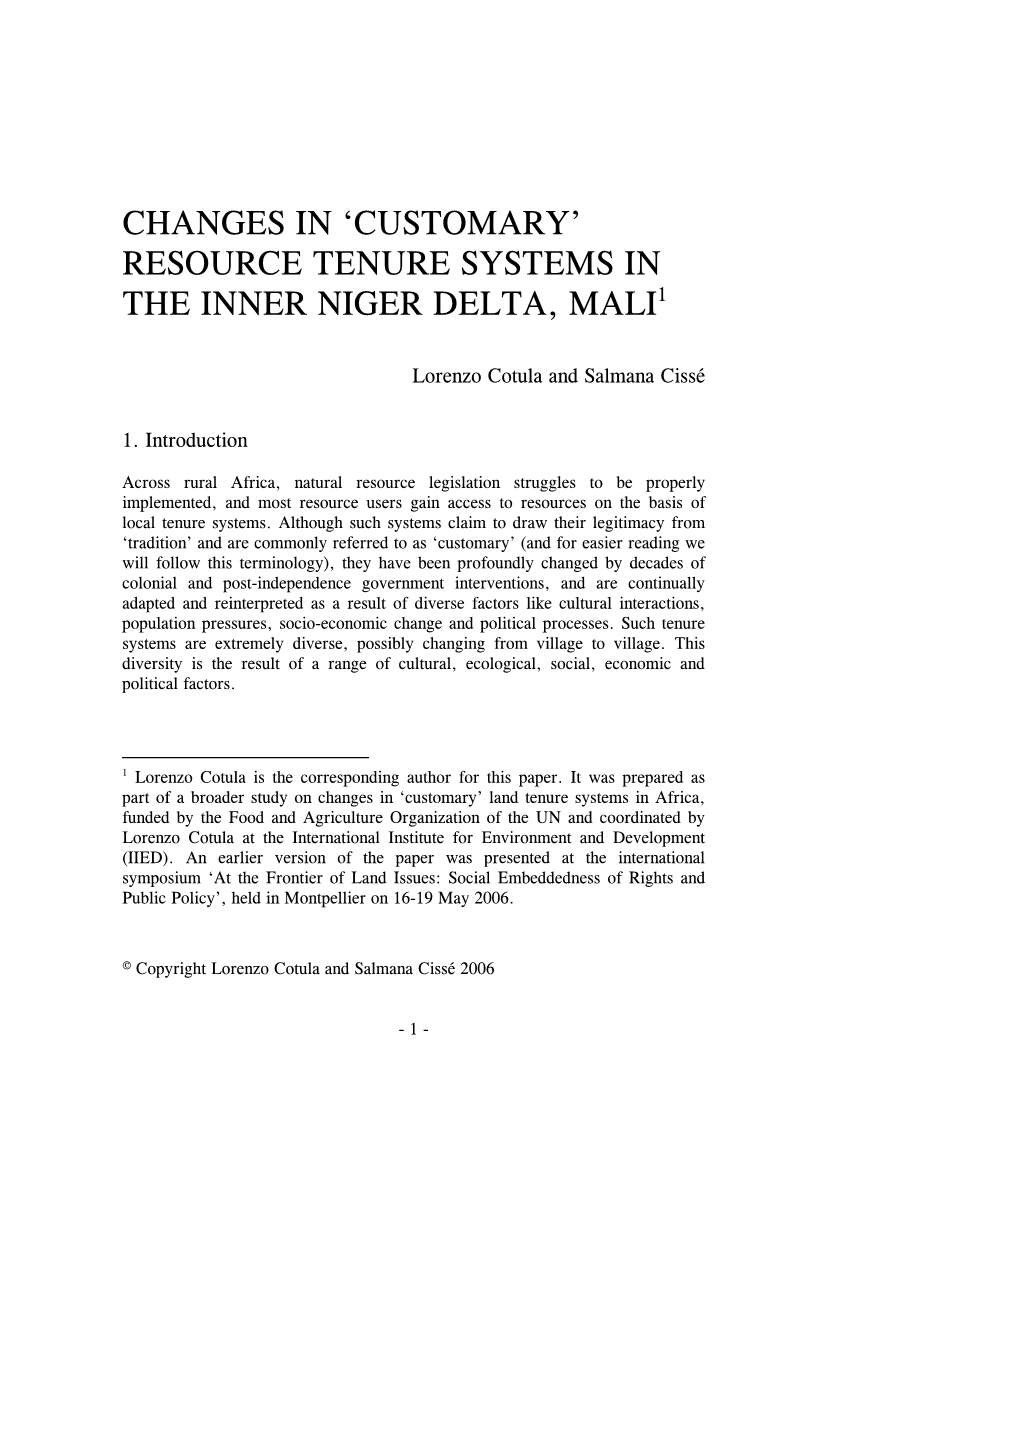 Resource Tenure Systems in 1 the Inner Niger Delta, Mali